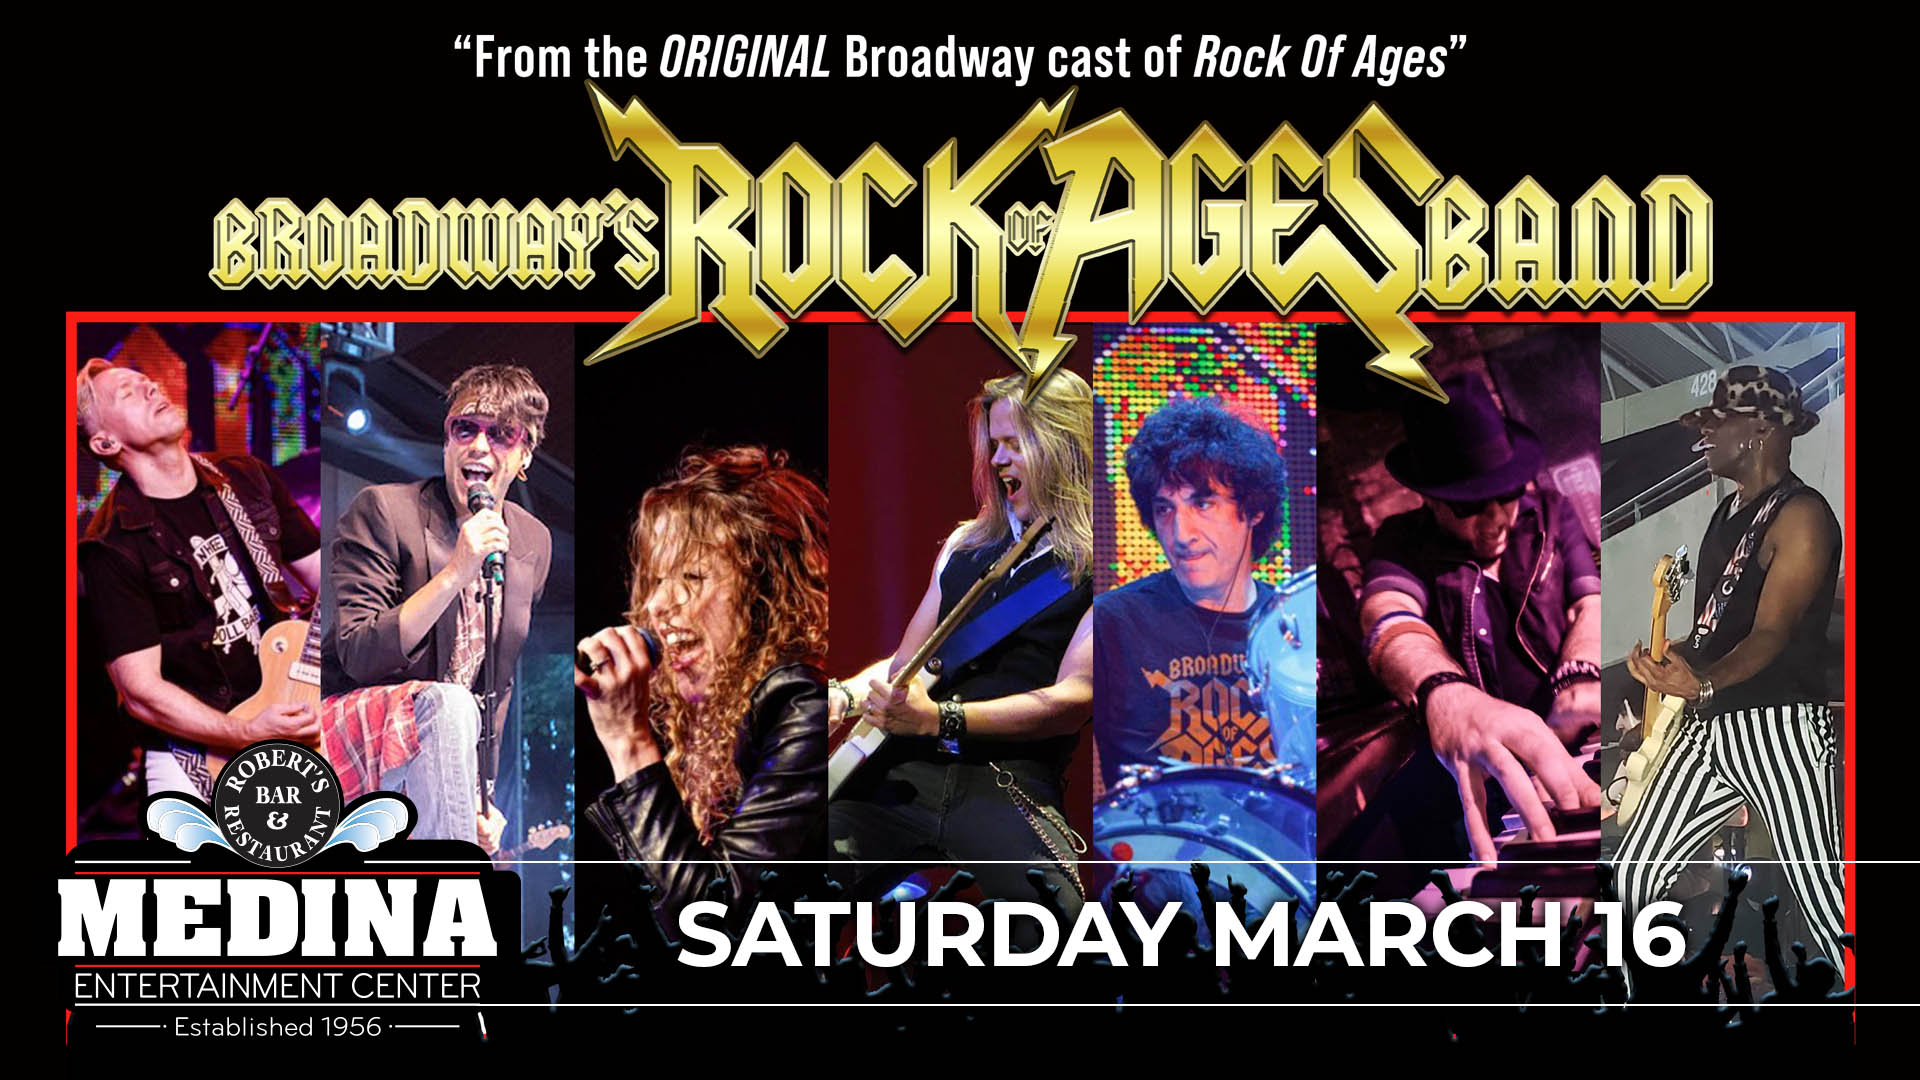 Broadway’s ROCK OF AGES Band with Johnny O’Neil Medina Entertainment Center Saturday, March 16, 2024 Doors: 7:00PM | Music: 8:00PM | 21+ Tickets on-sale Friday, January 12 at 12PM General Seating $40 / Silver Reserved $50 / Gold Reserved $55 plus applicable fees